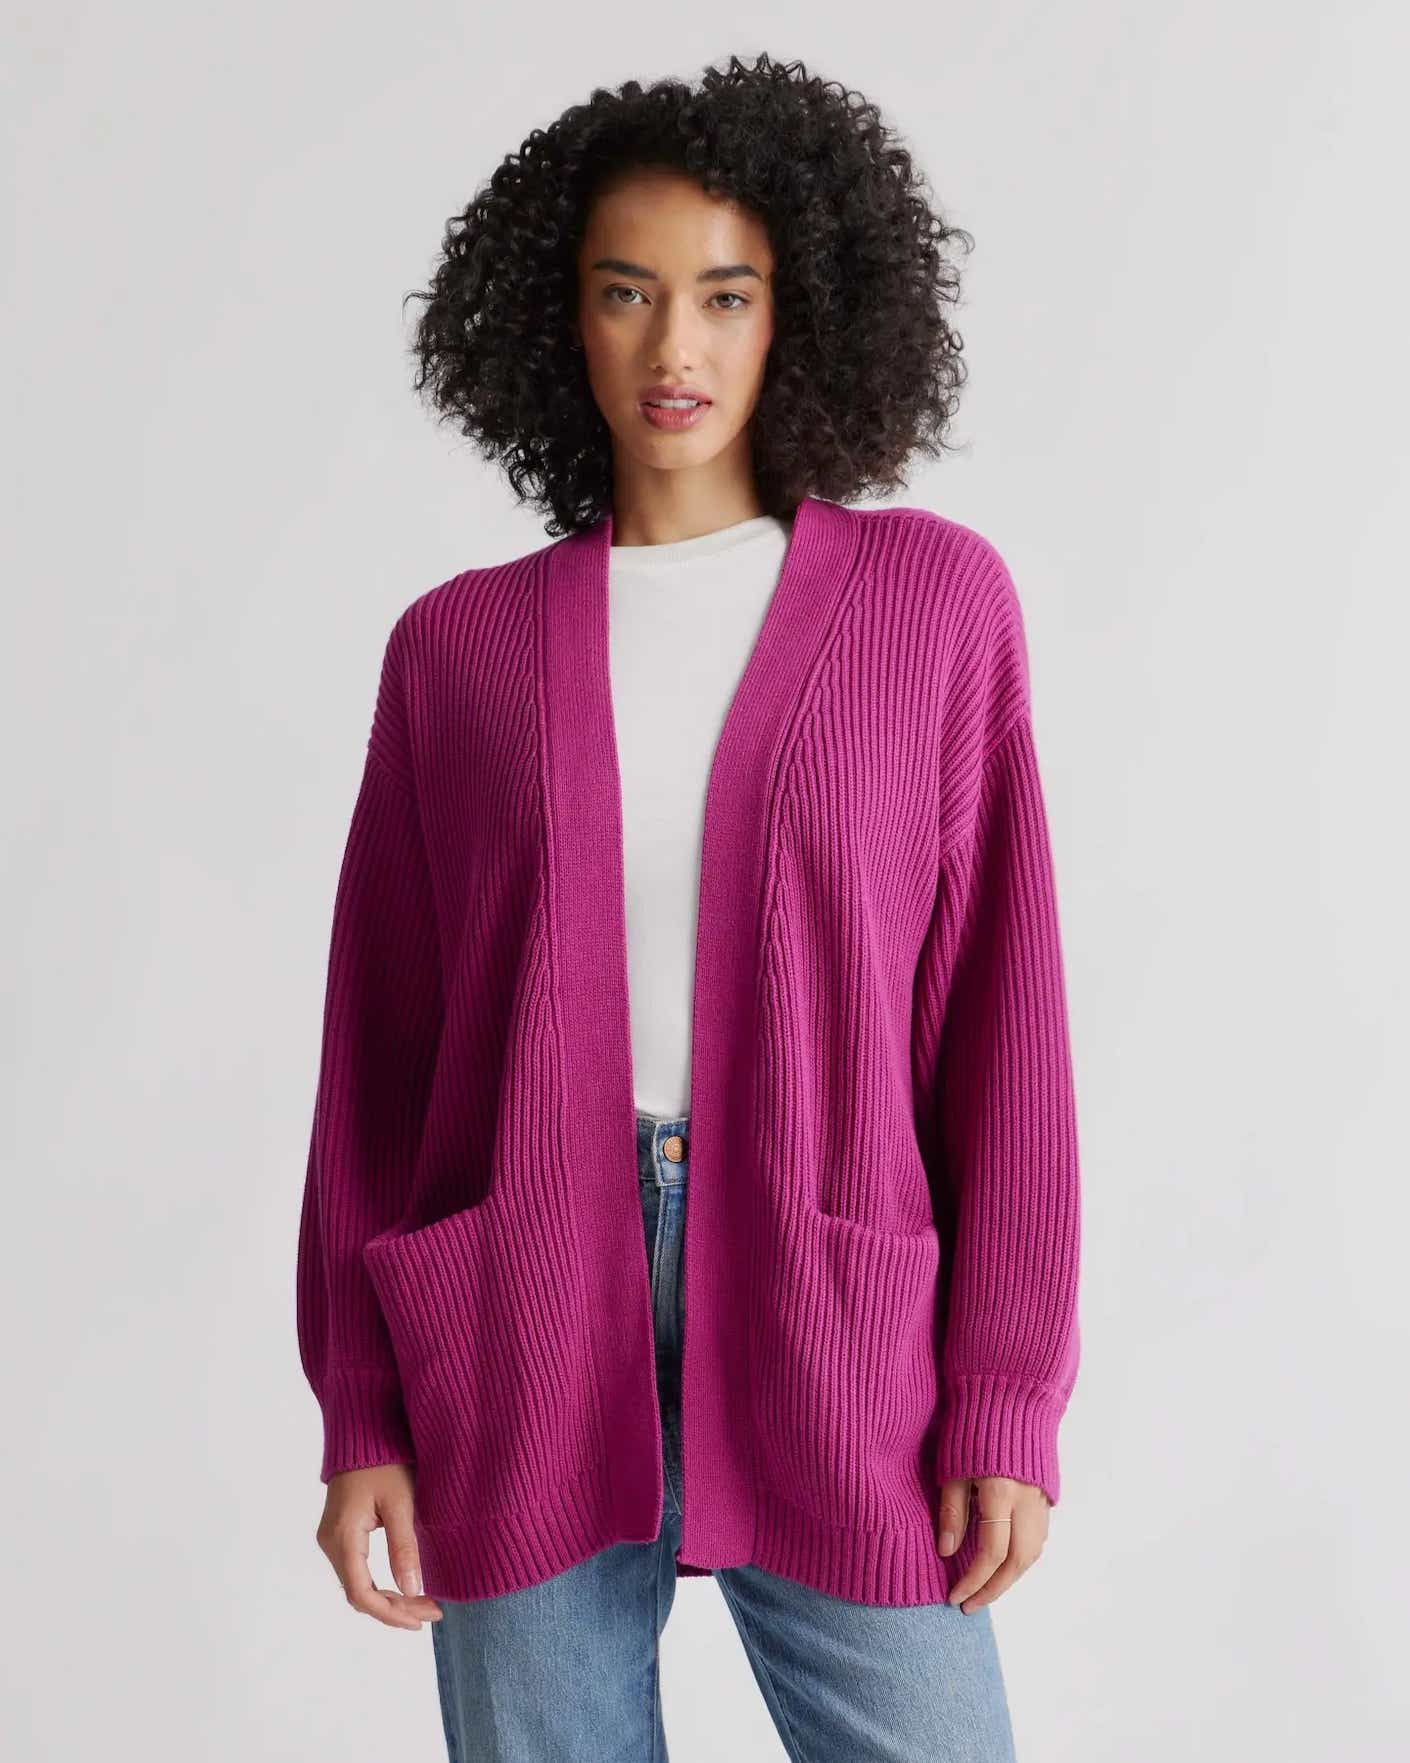 A woman wears an open front cardigan that is bright fuschia, soft, and falls below the hip.